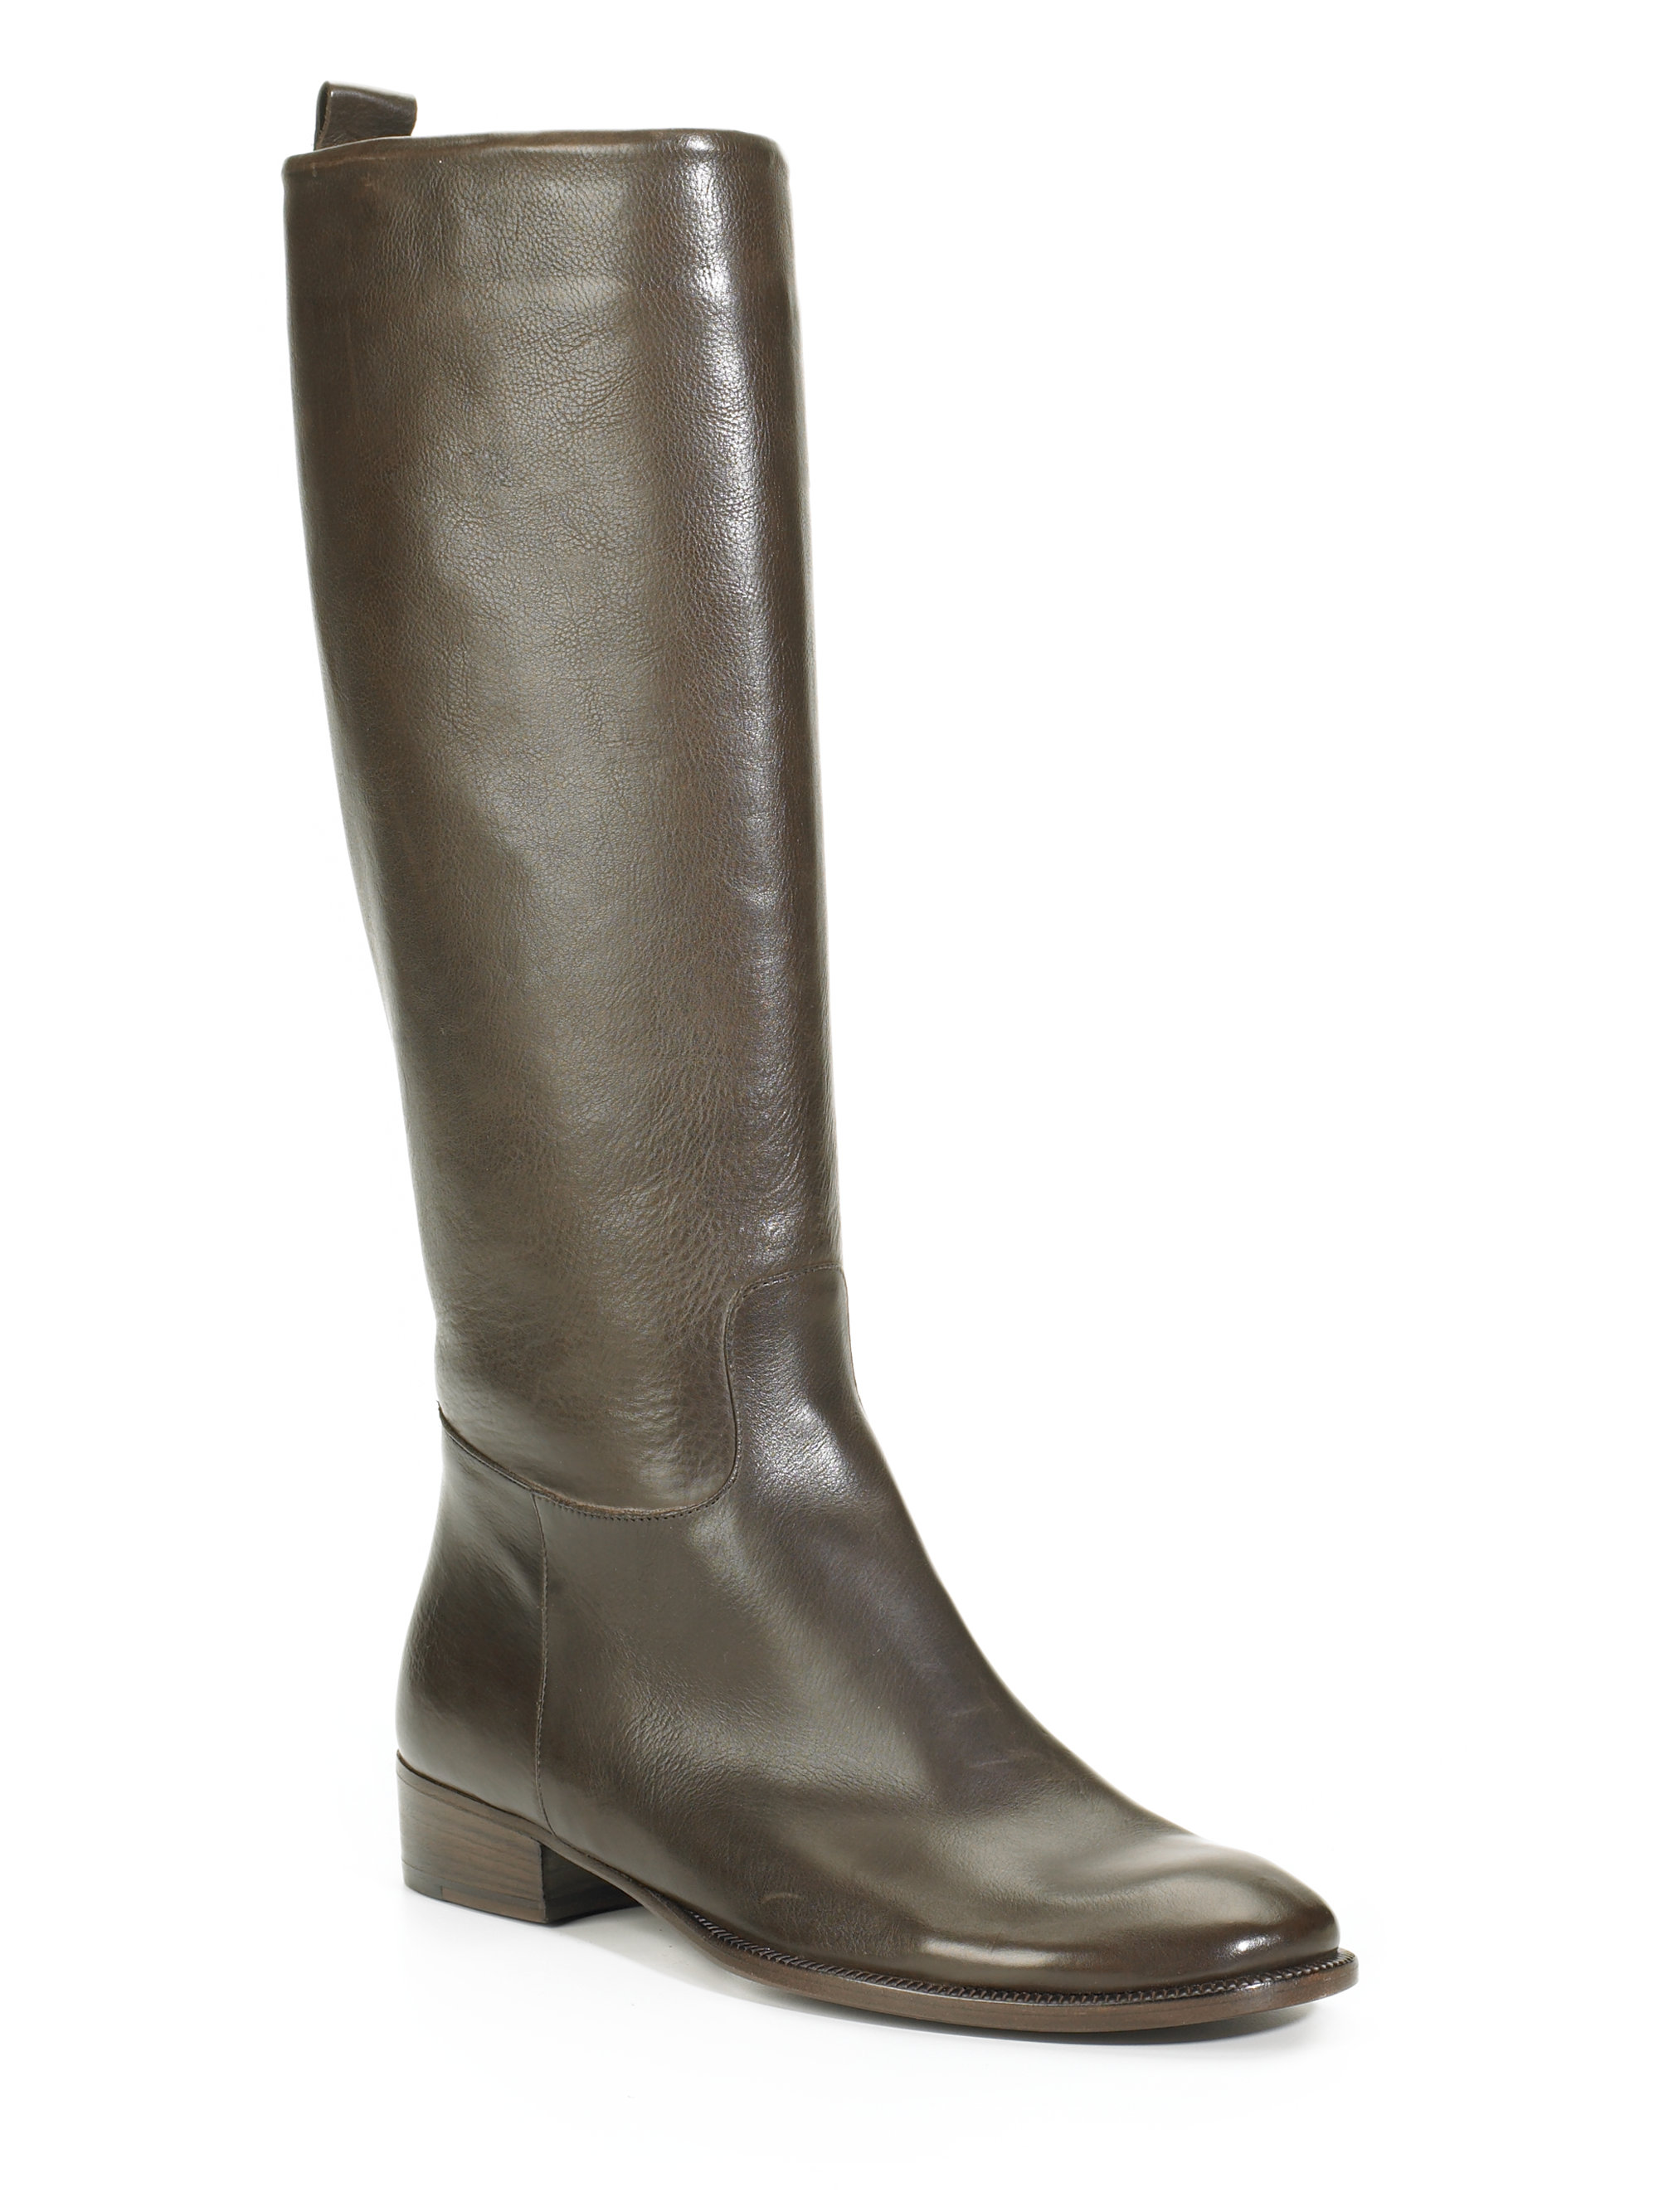 Max mara Knee-high Boots in Brown | Lyst